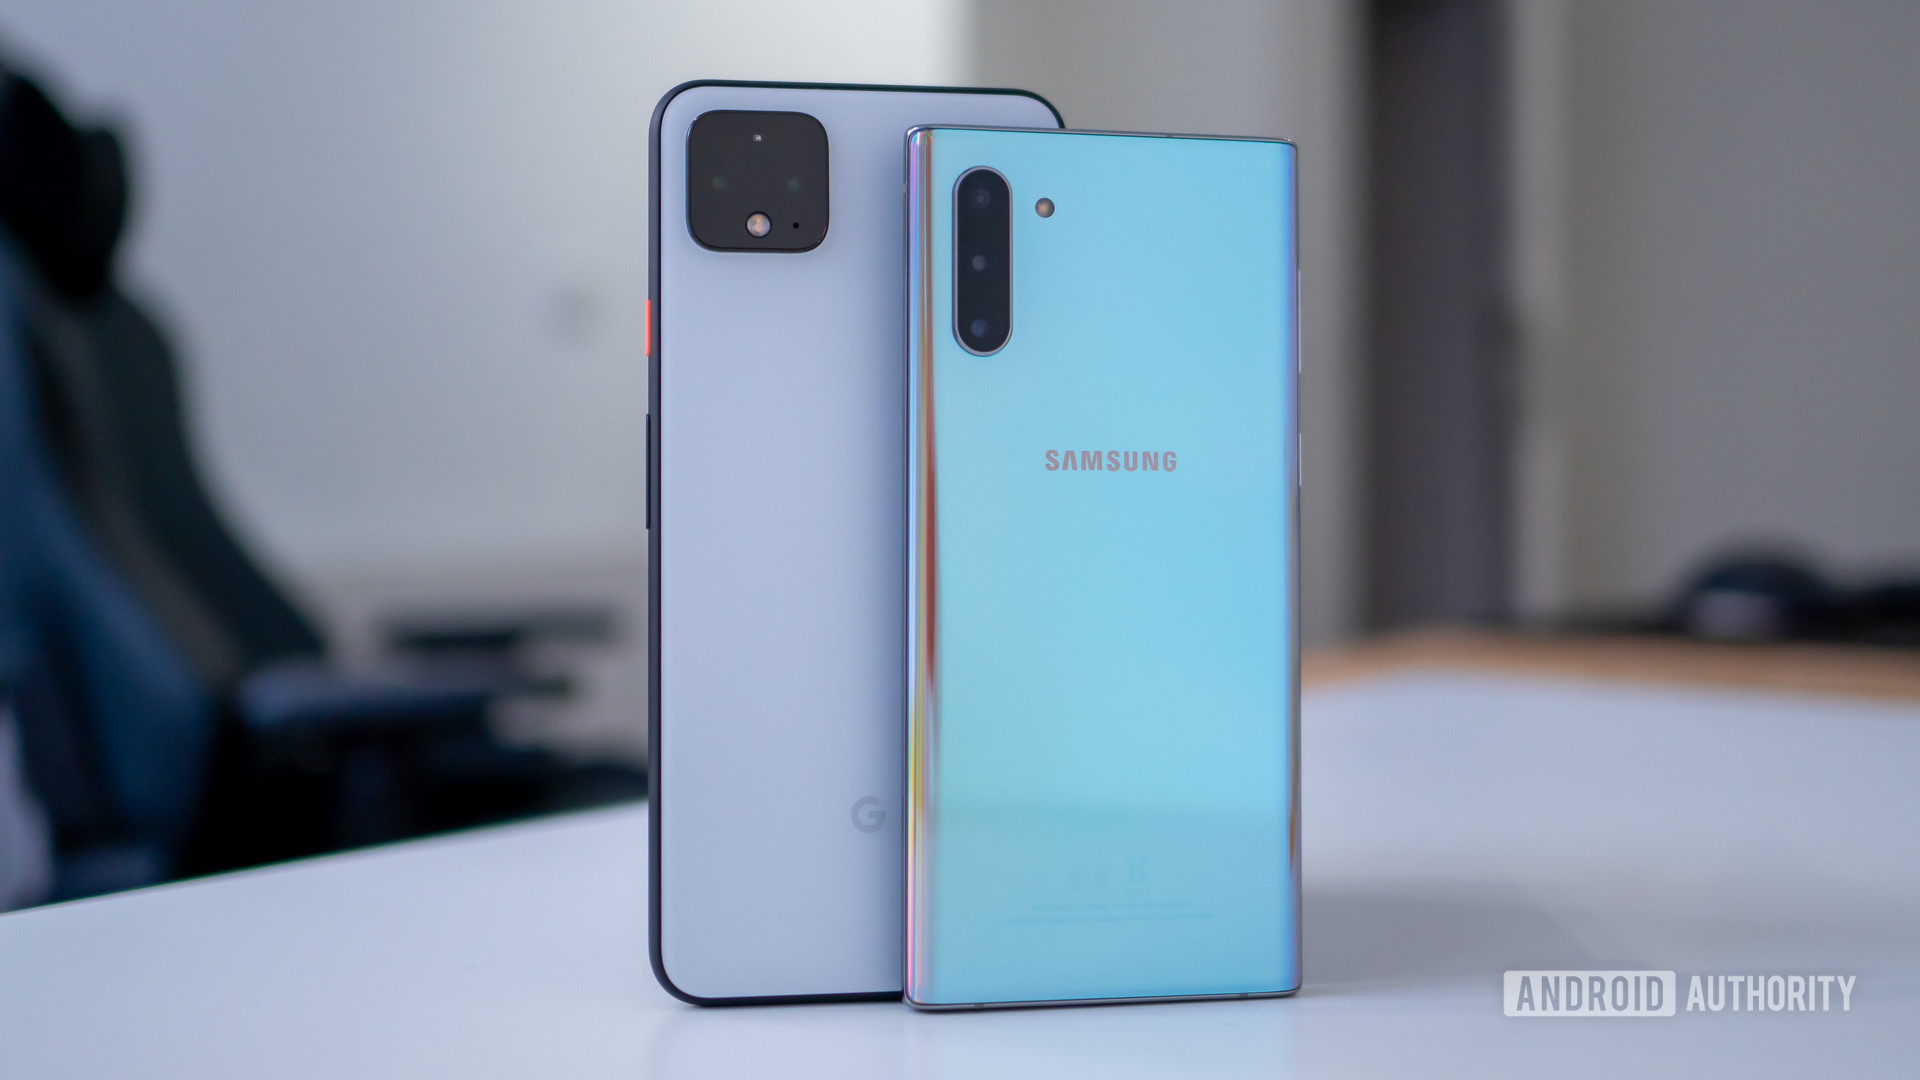 Google Pixel 4 XL and Samsung Galaxy Note 10 on a table